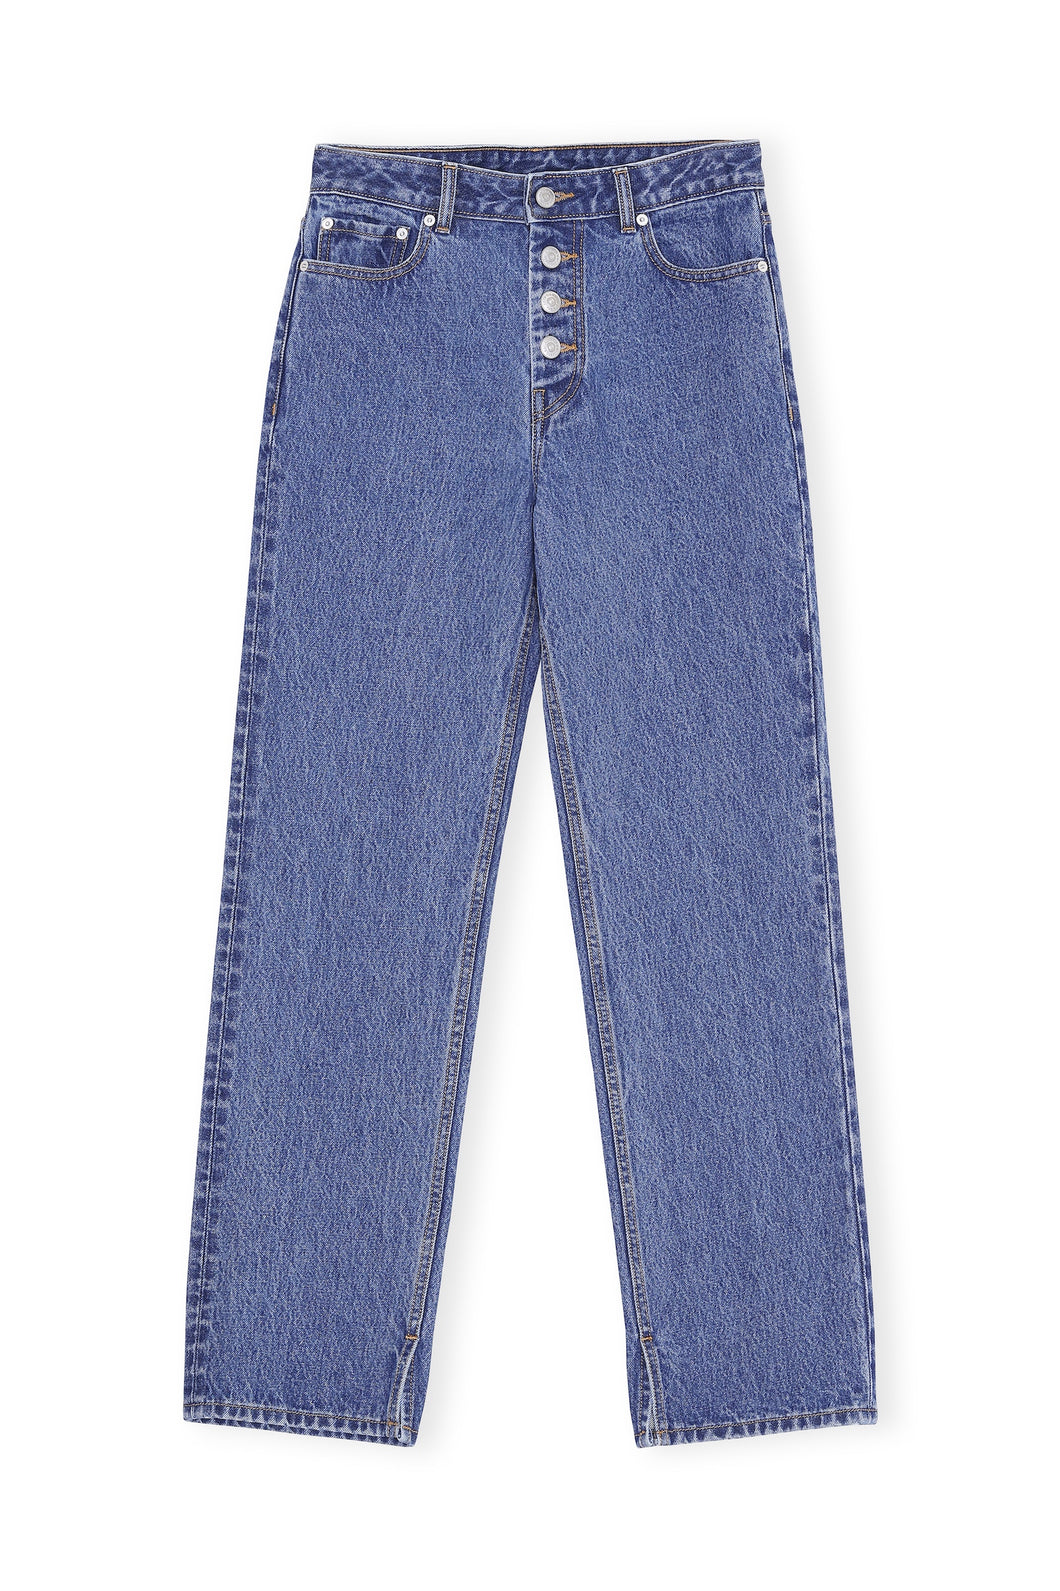 RELAXED FIT JEANS DENIM